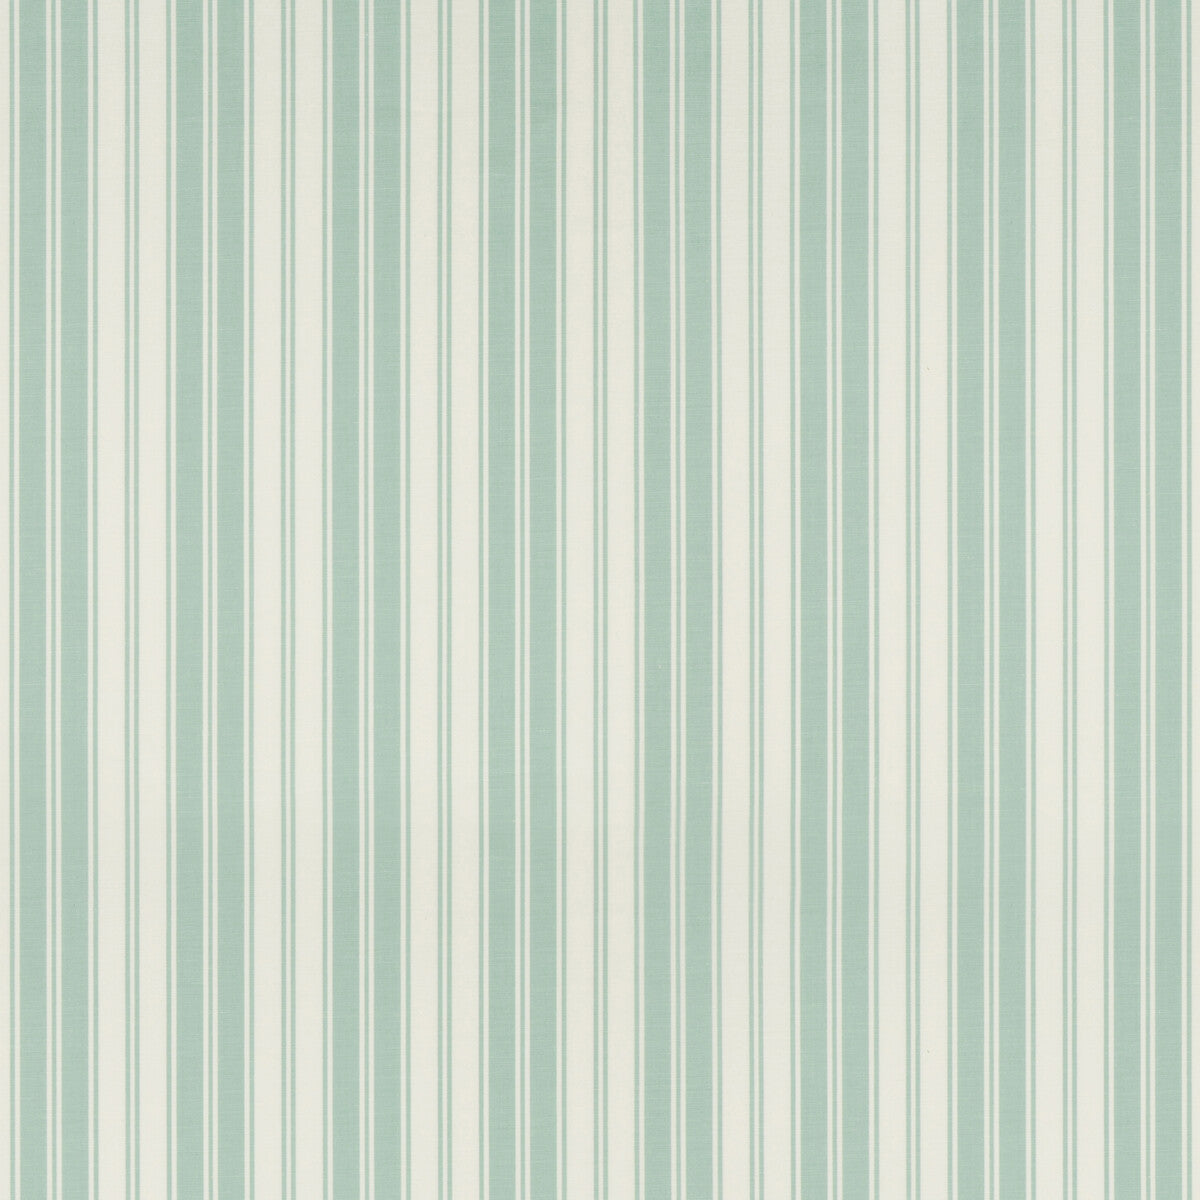 Audemar Stripe fabric in aqua color - pattern 8019106.13.0 - by Brunschwig &amp; Fils in the Normant Checks And Stripes collection